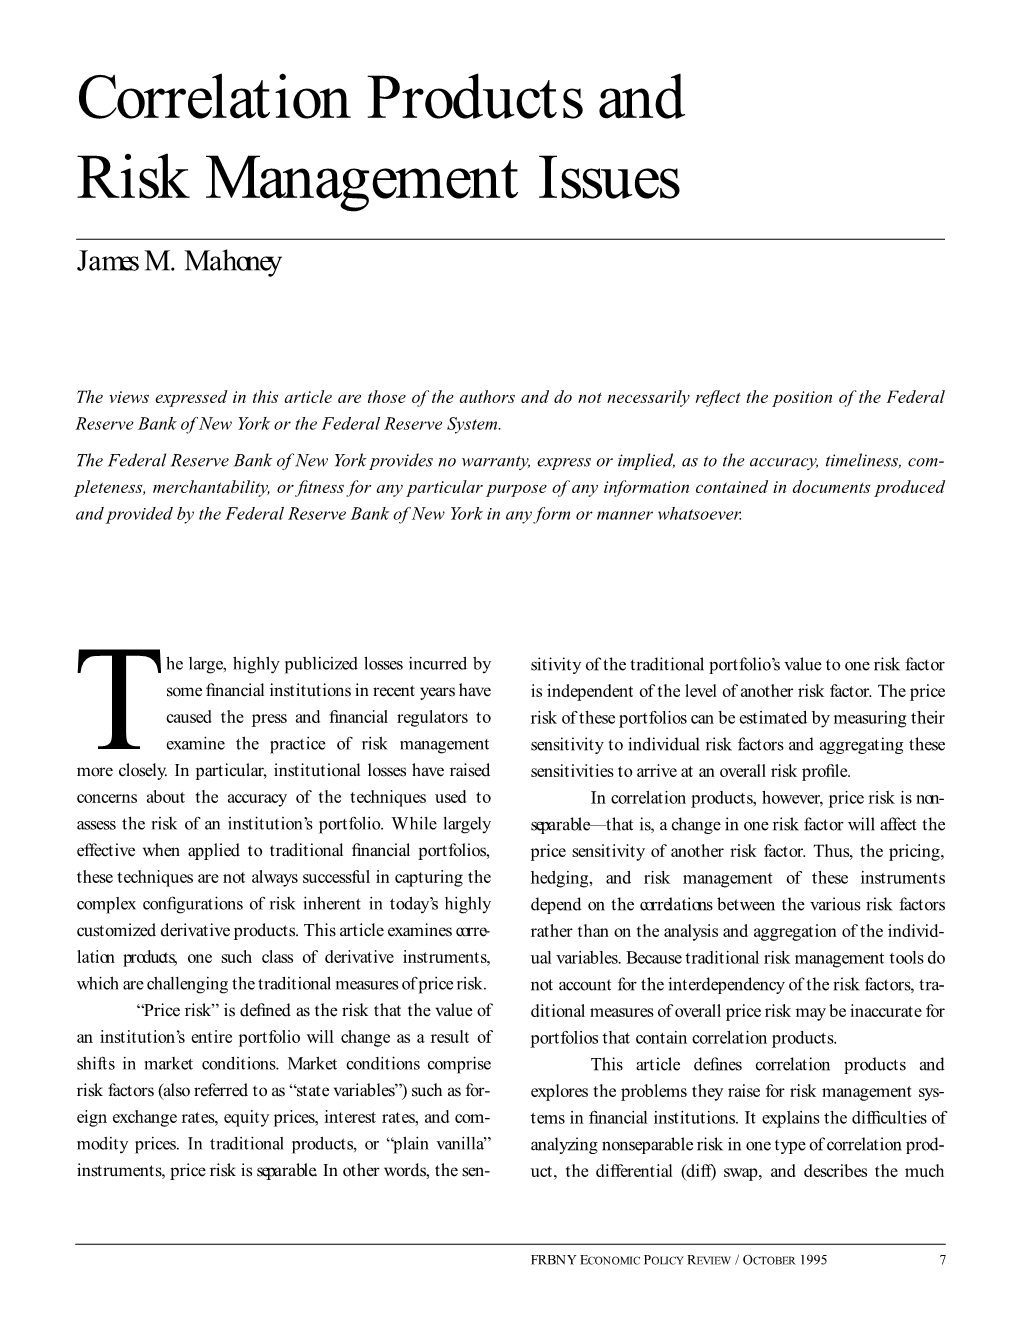 Correlation Products and Risk Management Issues